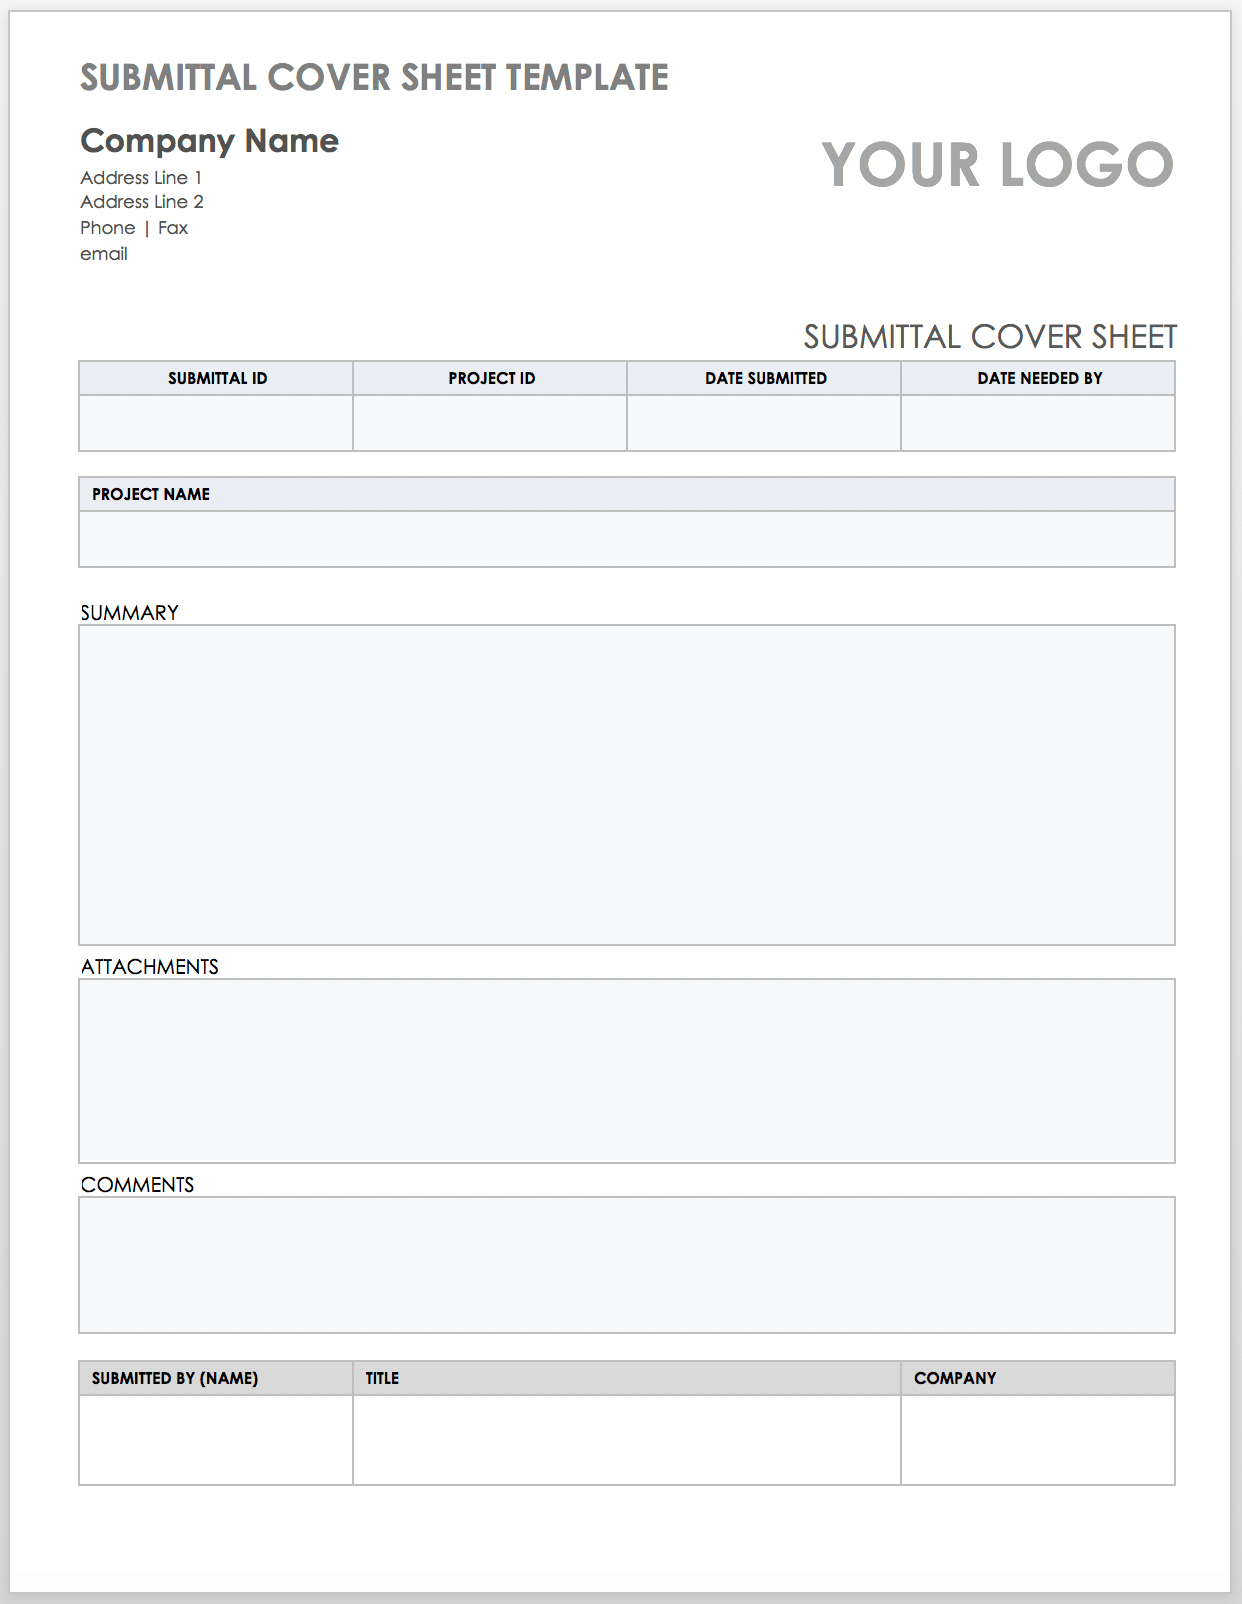 Free Construction Submittal Form Template Printable Templates